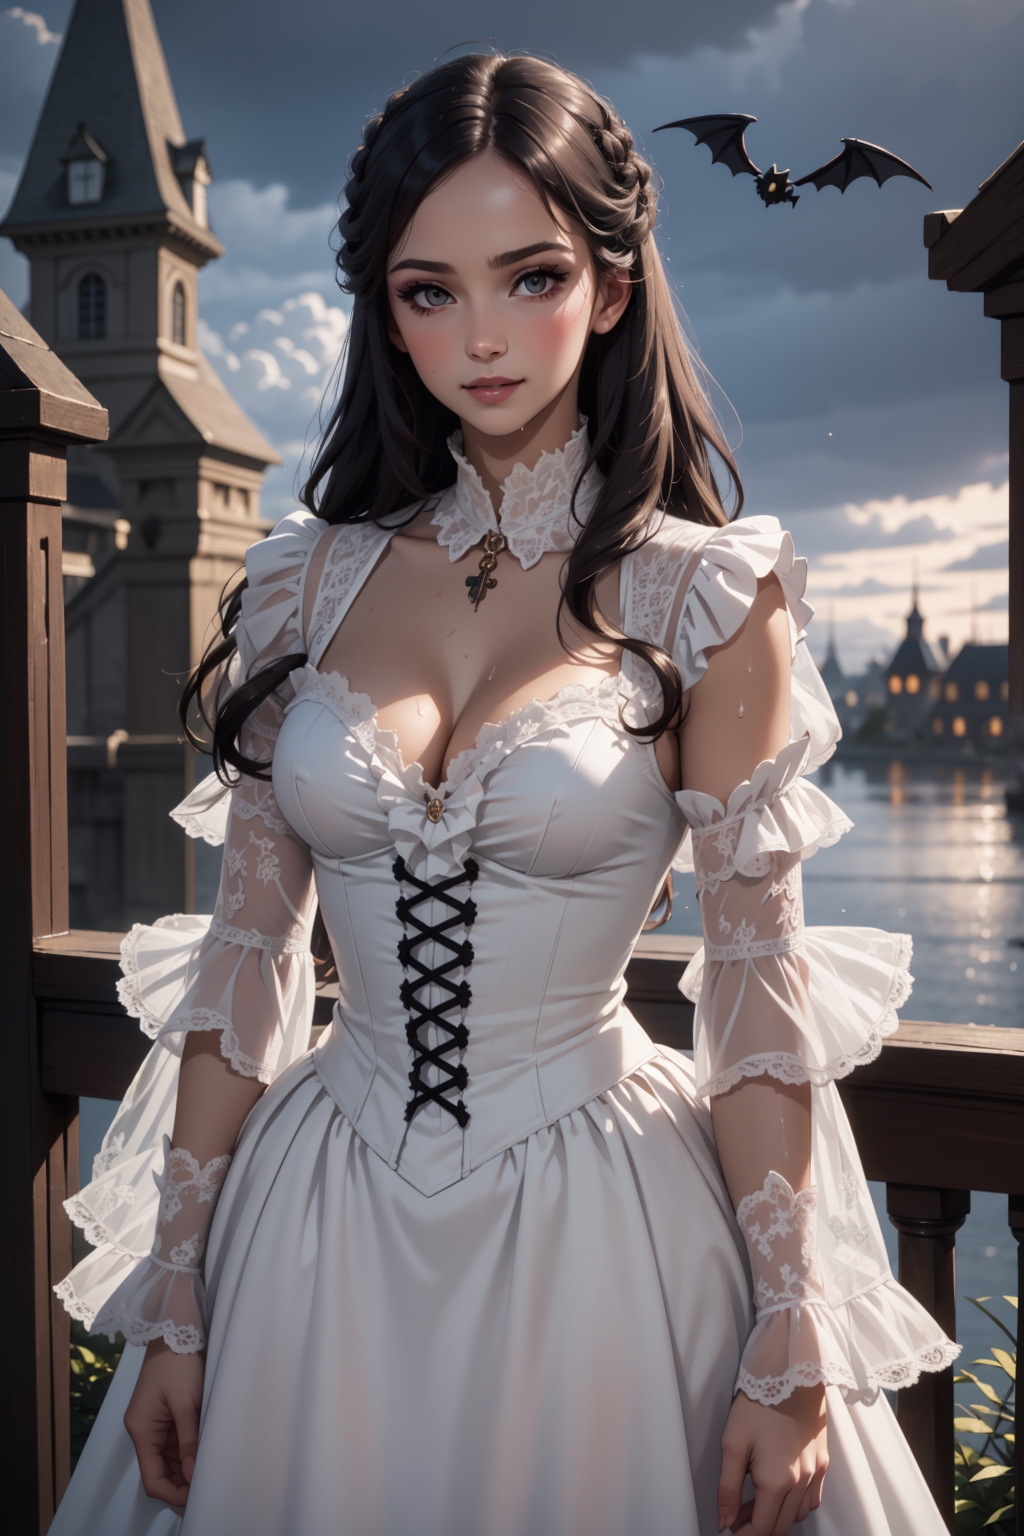 anime girl in a victorian dress base